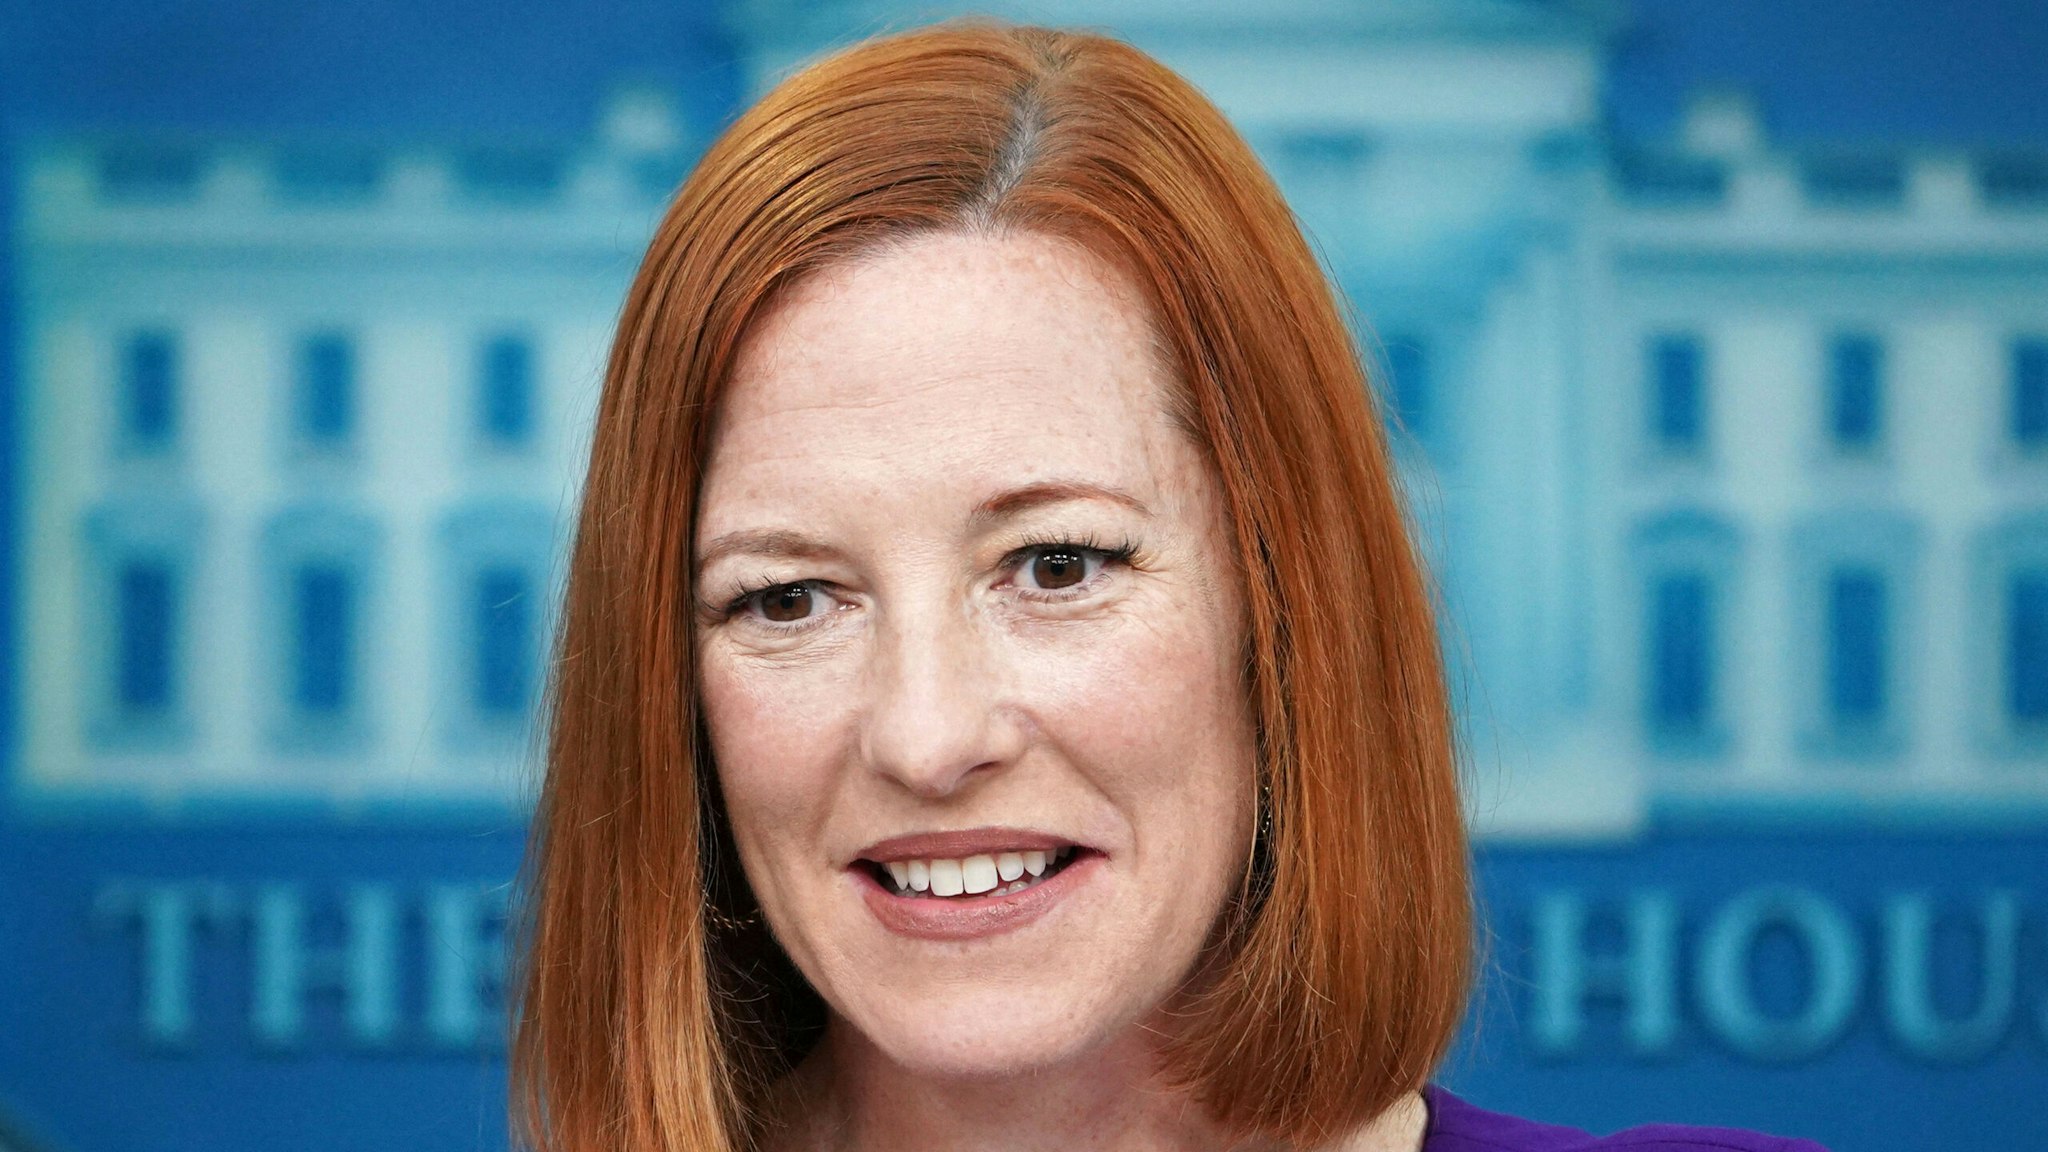 White House Press Secretary Jen Psaki speaks during the daily briefing in the Brady Briefing Room of the White House in Washington, DC, on April 5, 2022.